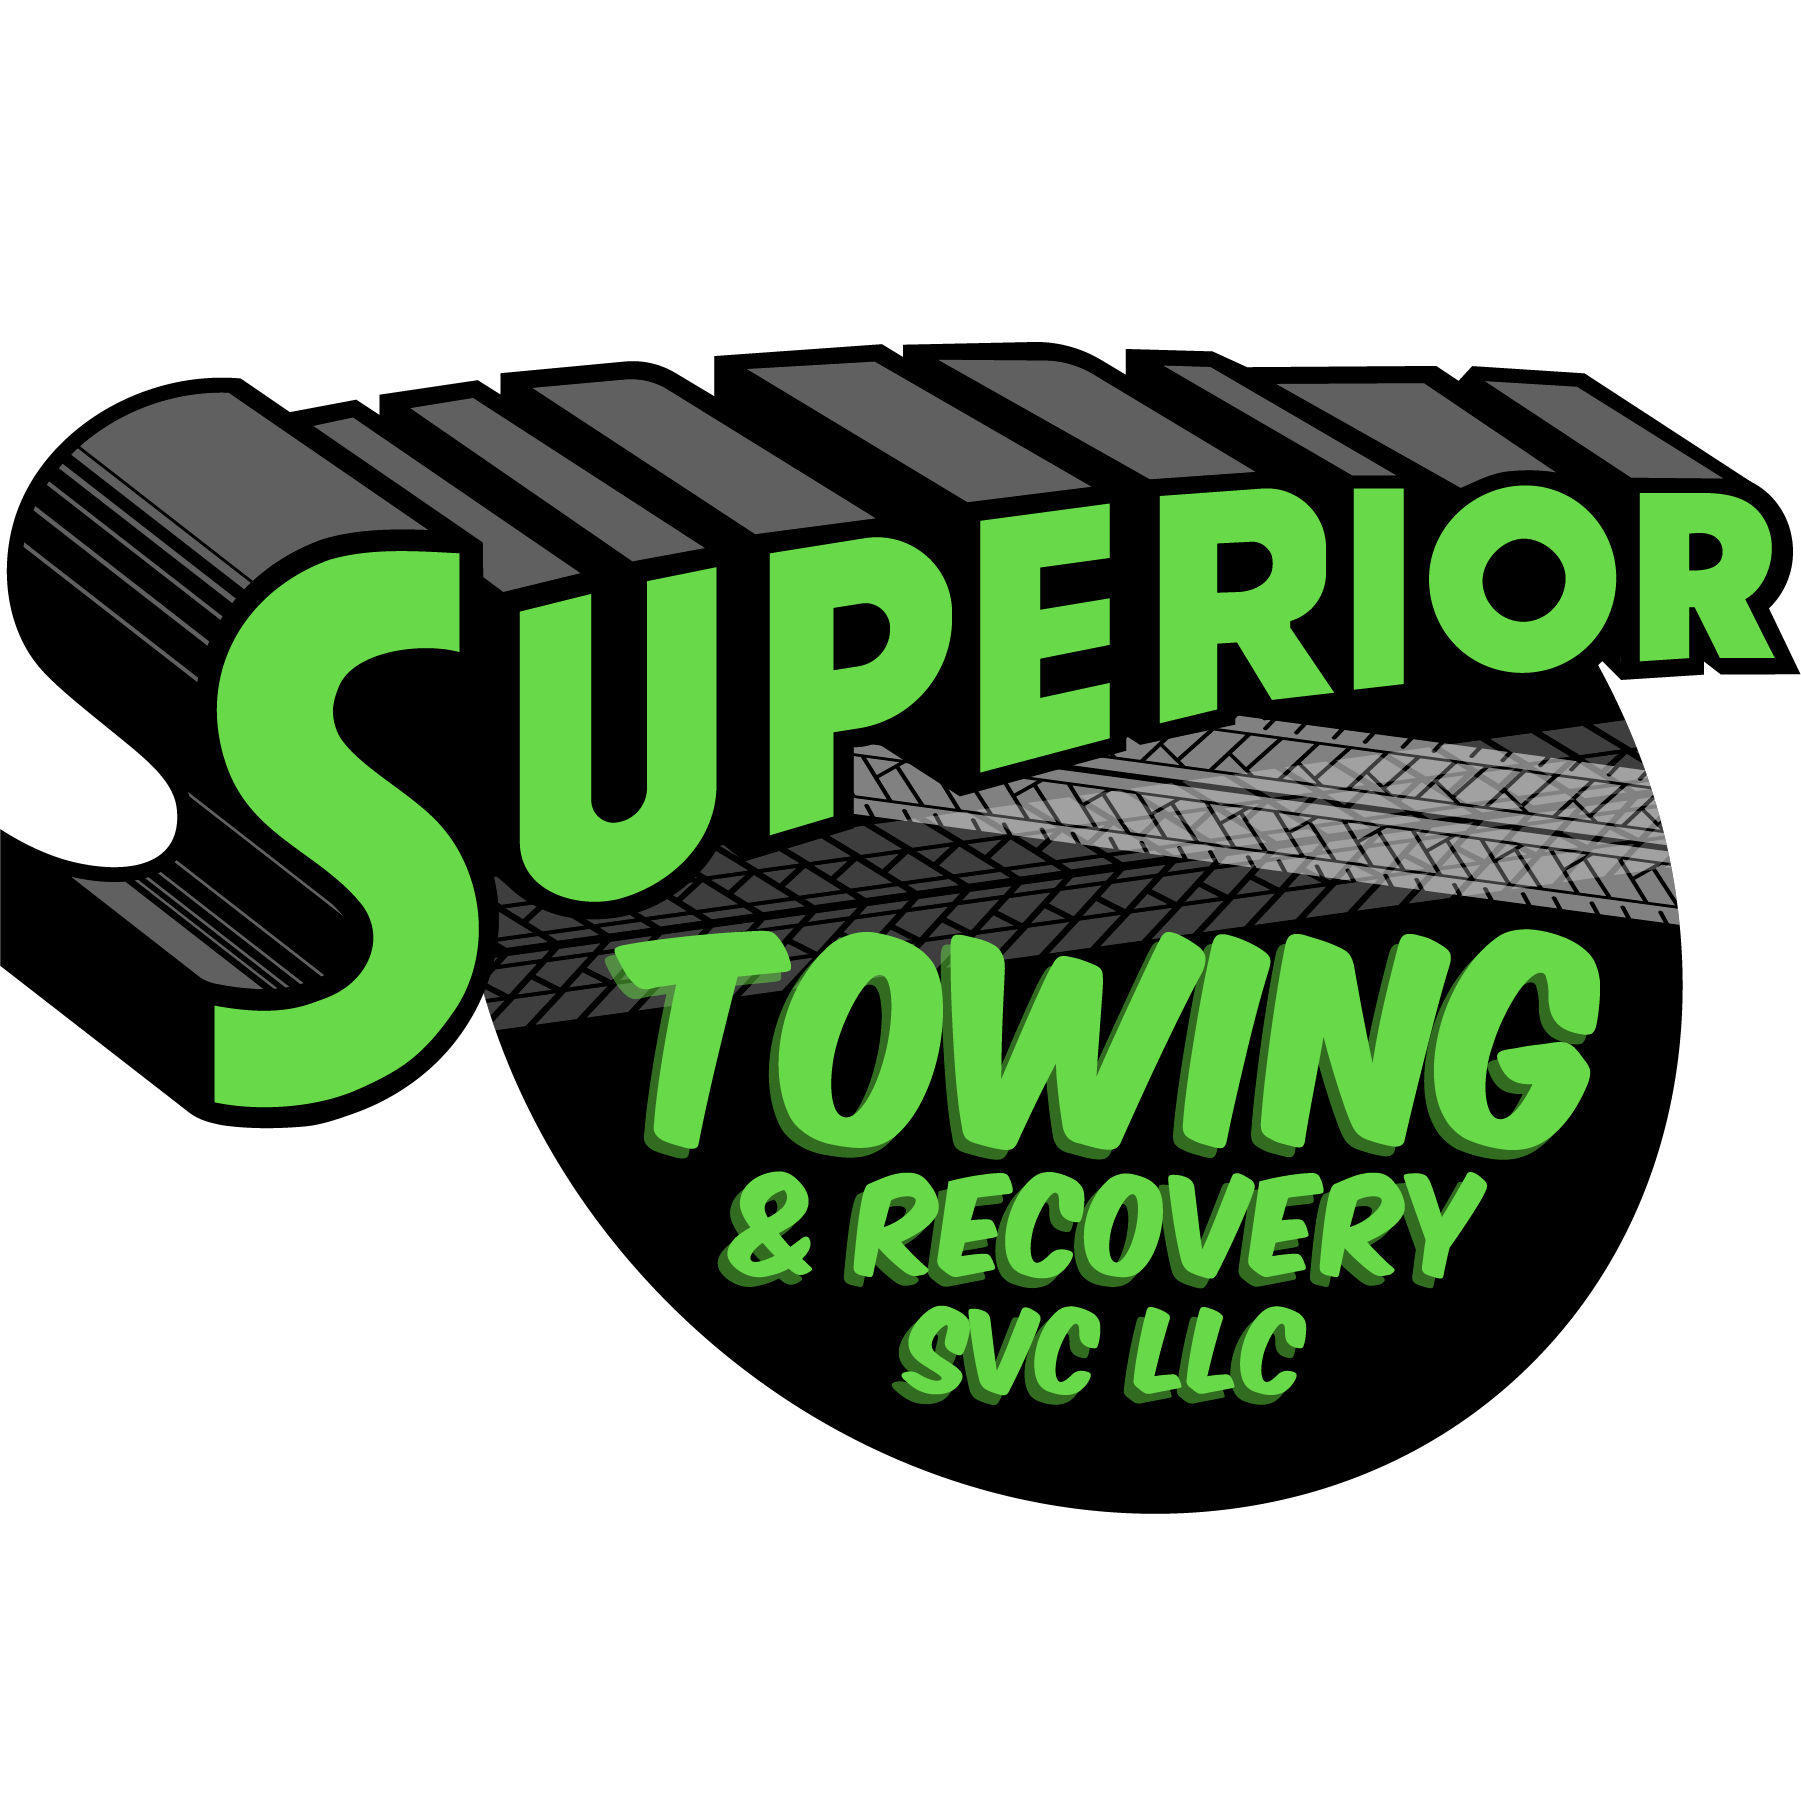 Superior Towing and Recovery Svc LLC - Milwaukee, WI - (414)949-0926 | ShowMeLocal.com